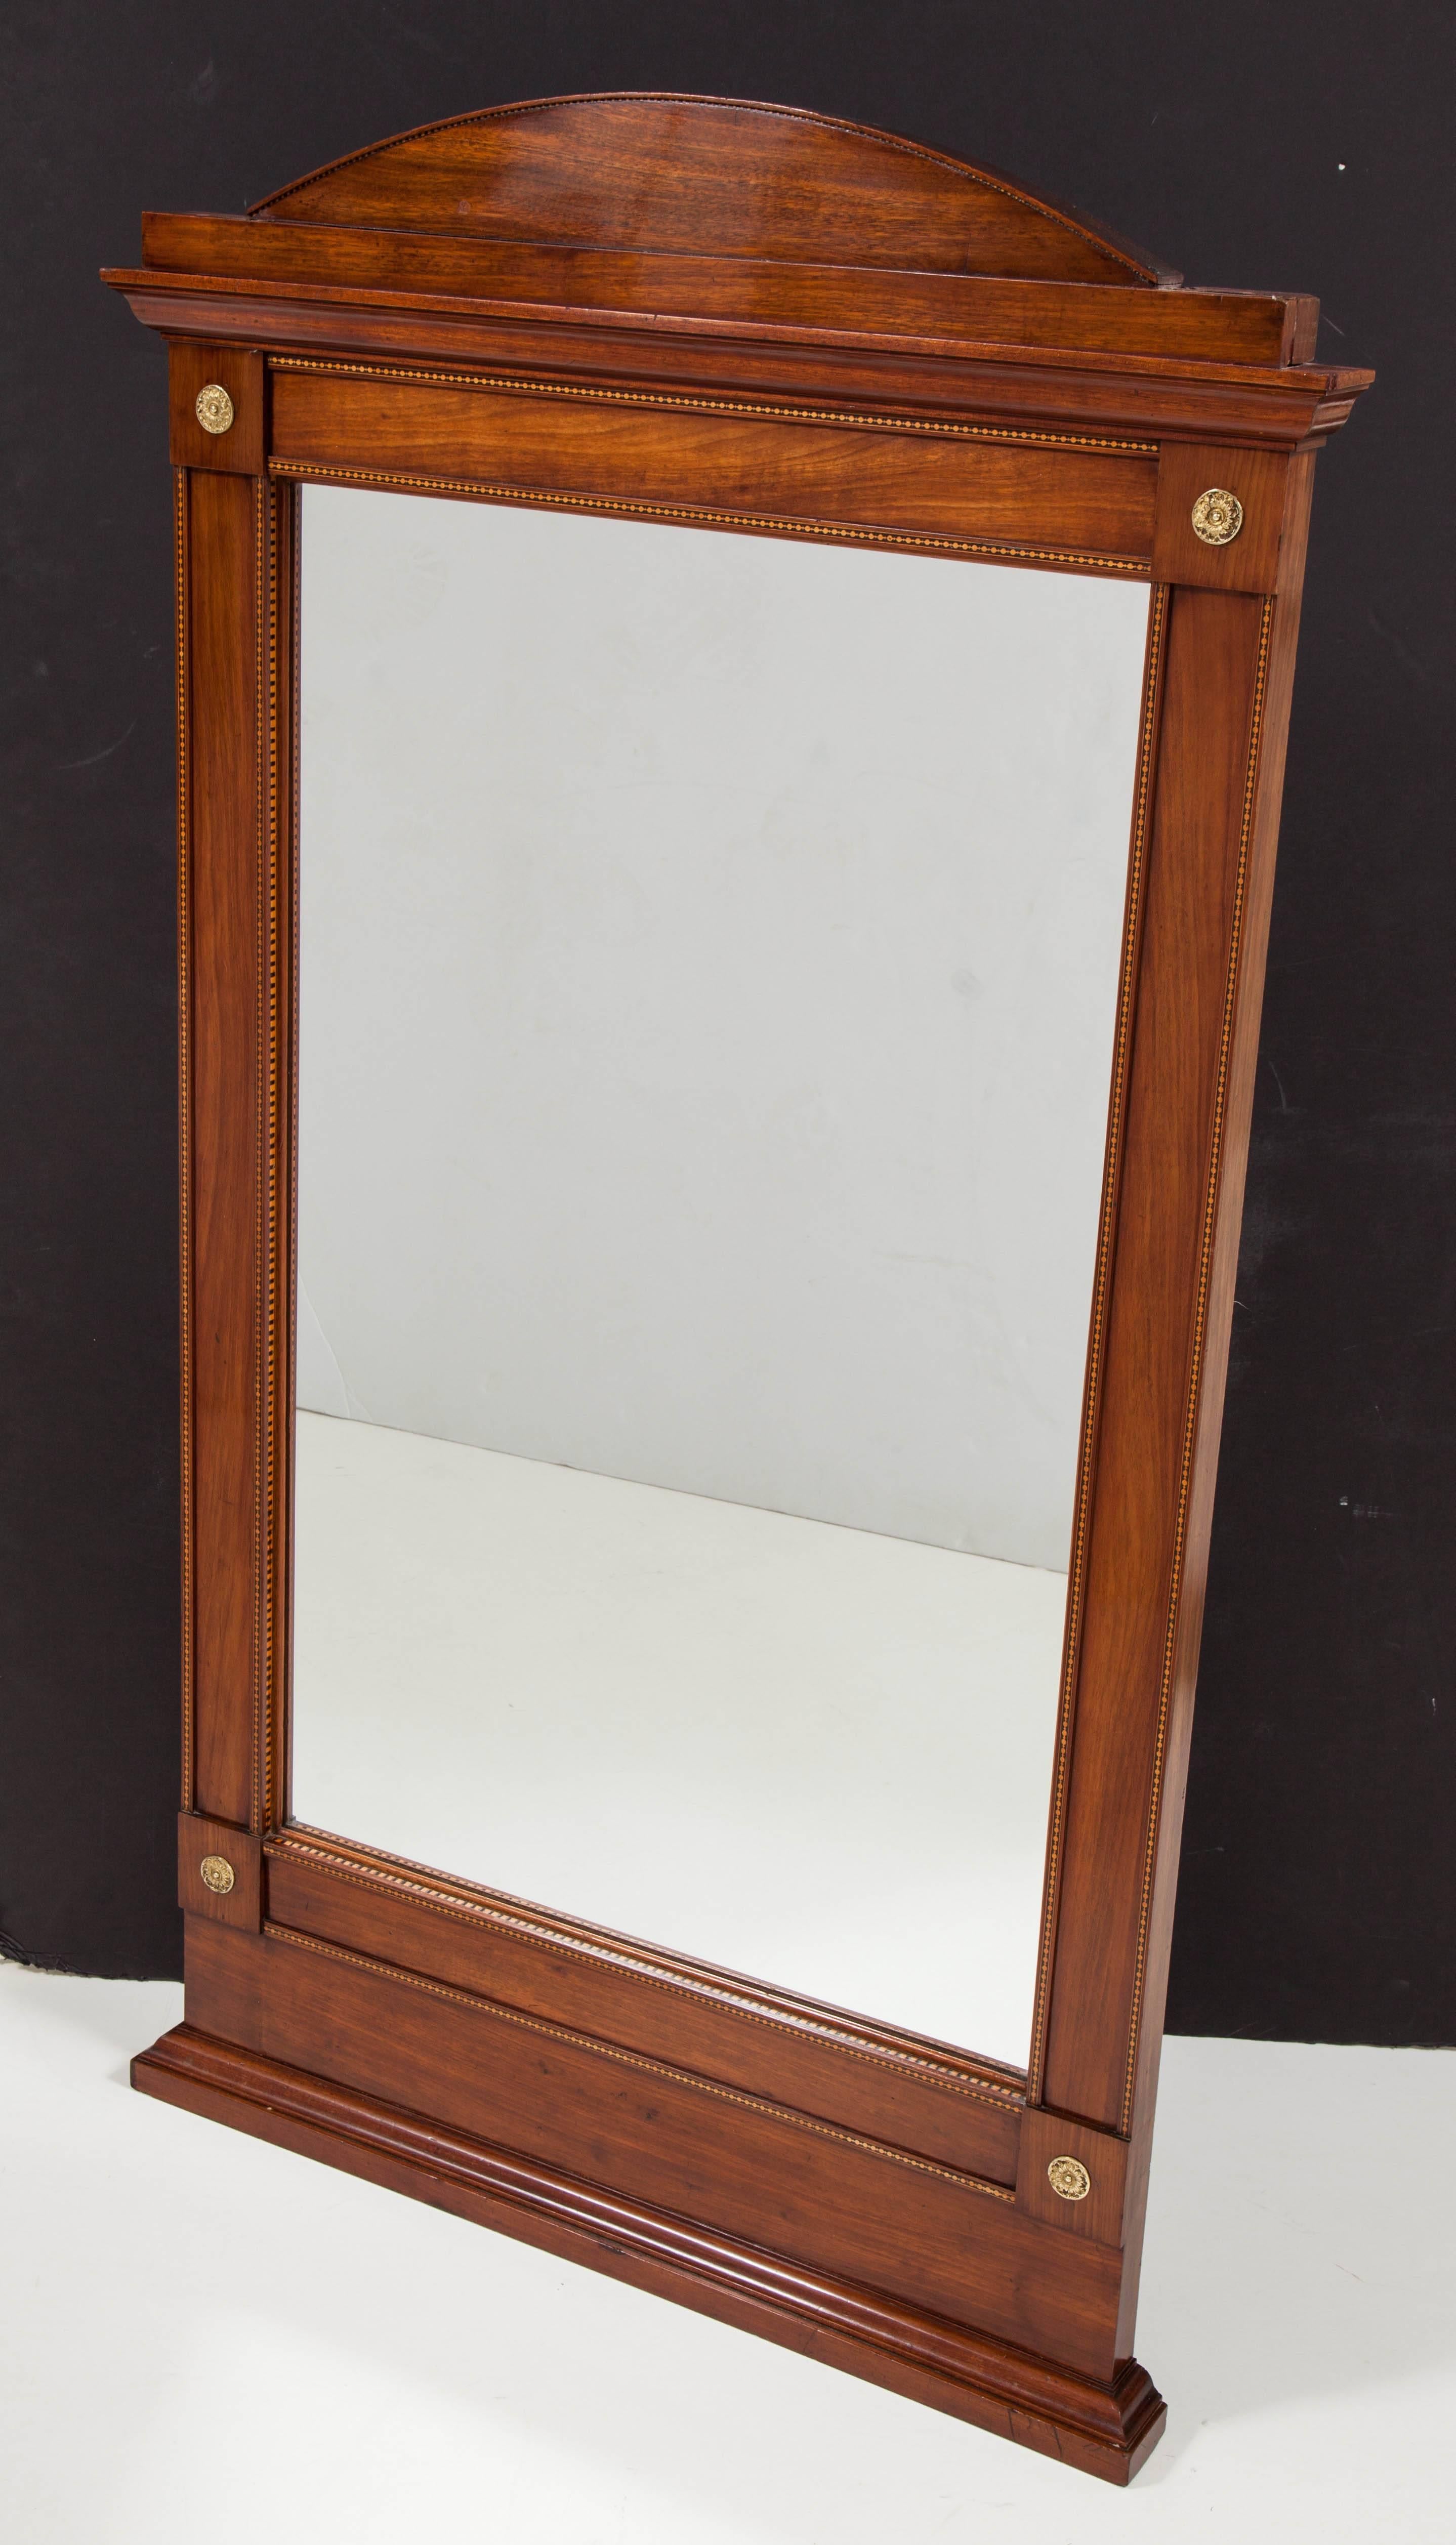 A Swedish Empire mahogany mirror with subtle fruitwood geometric inlays, circa 1820, with an arched top above a steeped molding, the replaced mirror plate surrounded by a flat and molded rectangular frame with box corners mounted with bronze